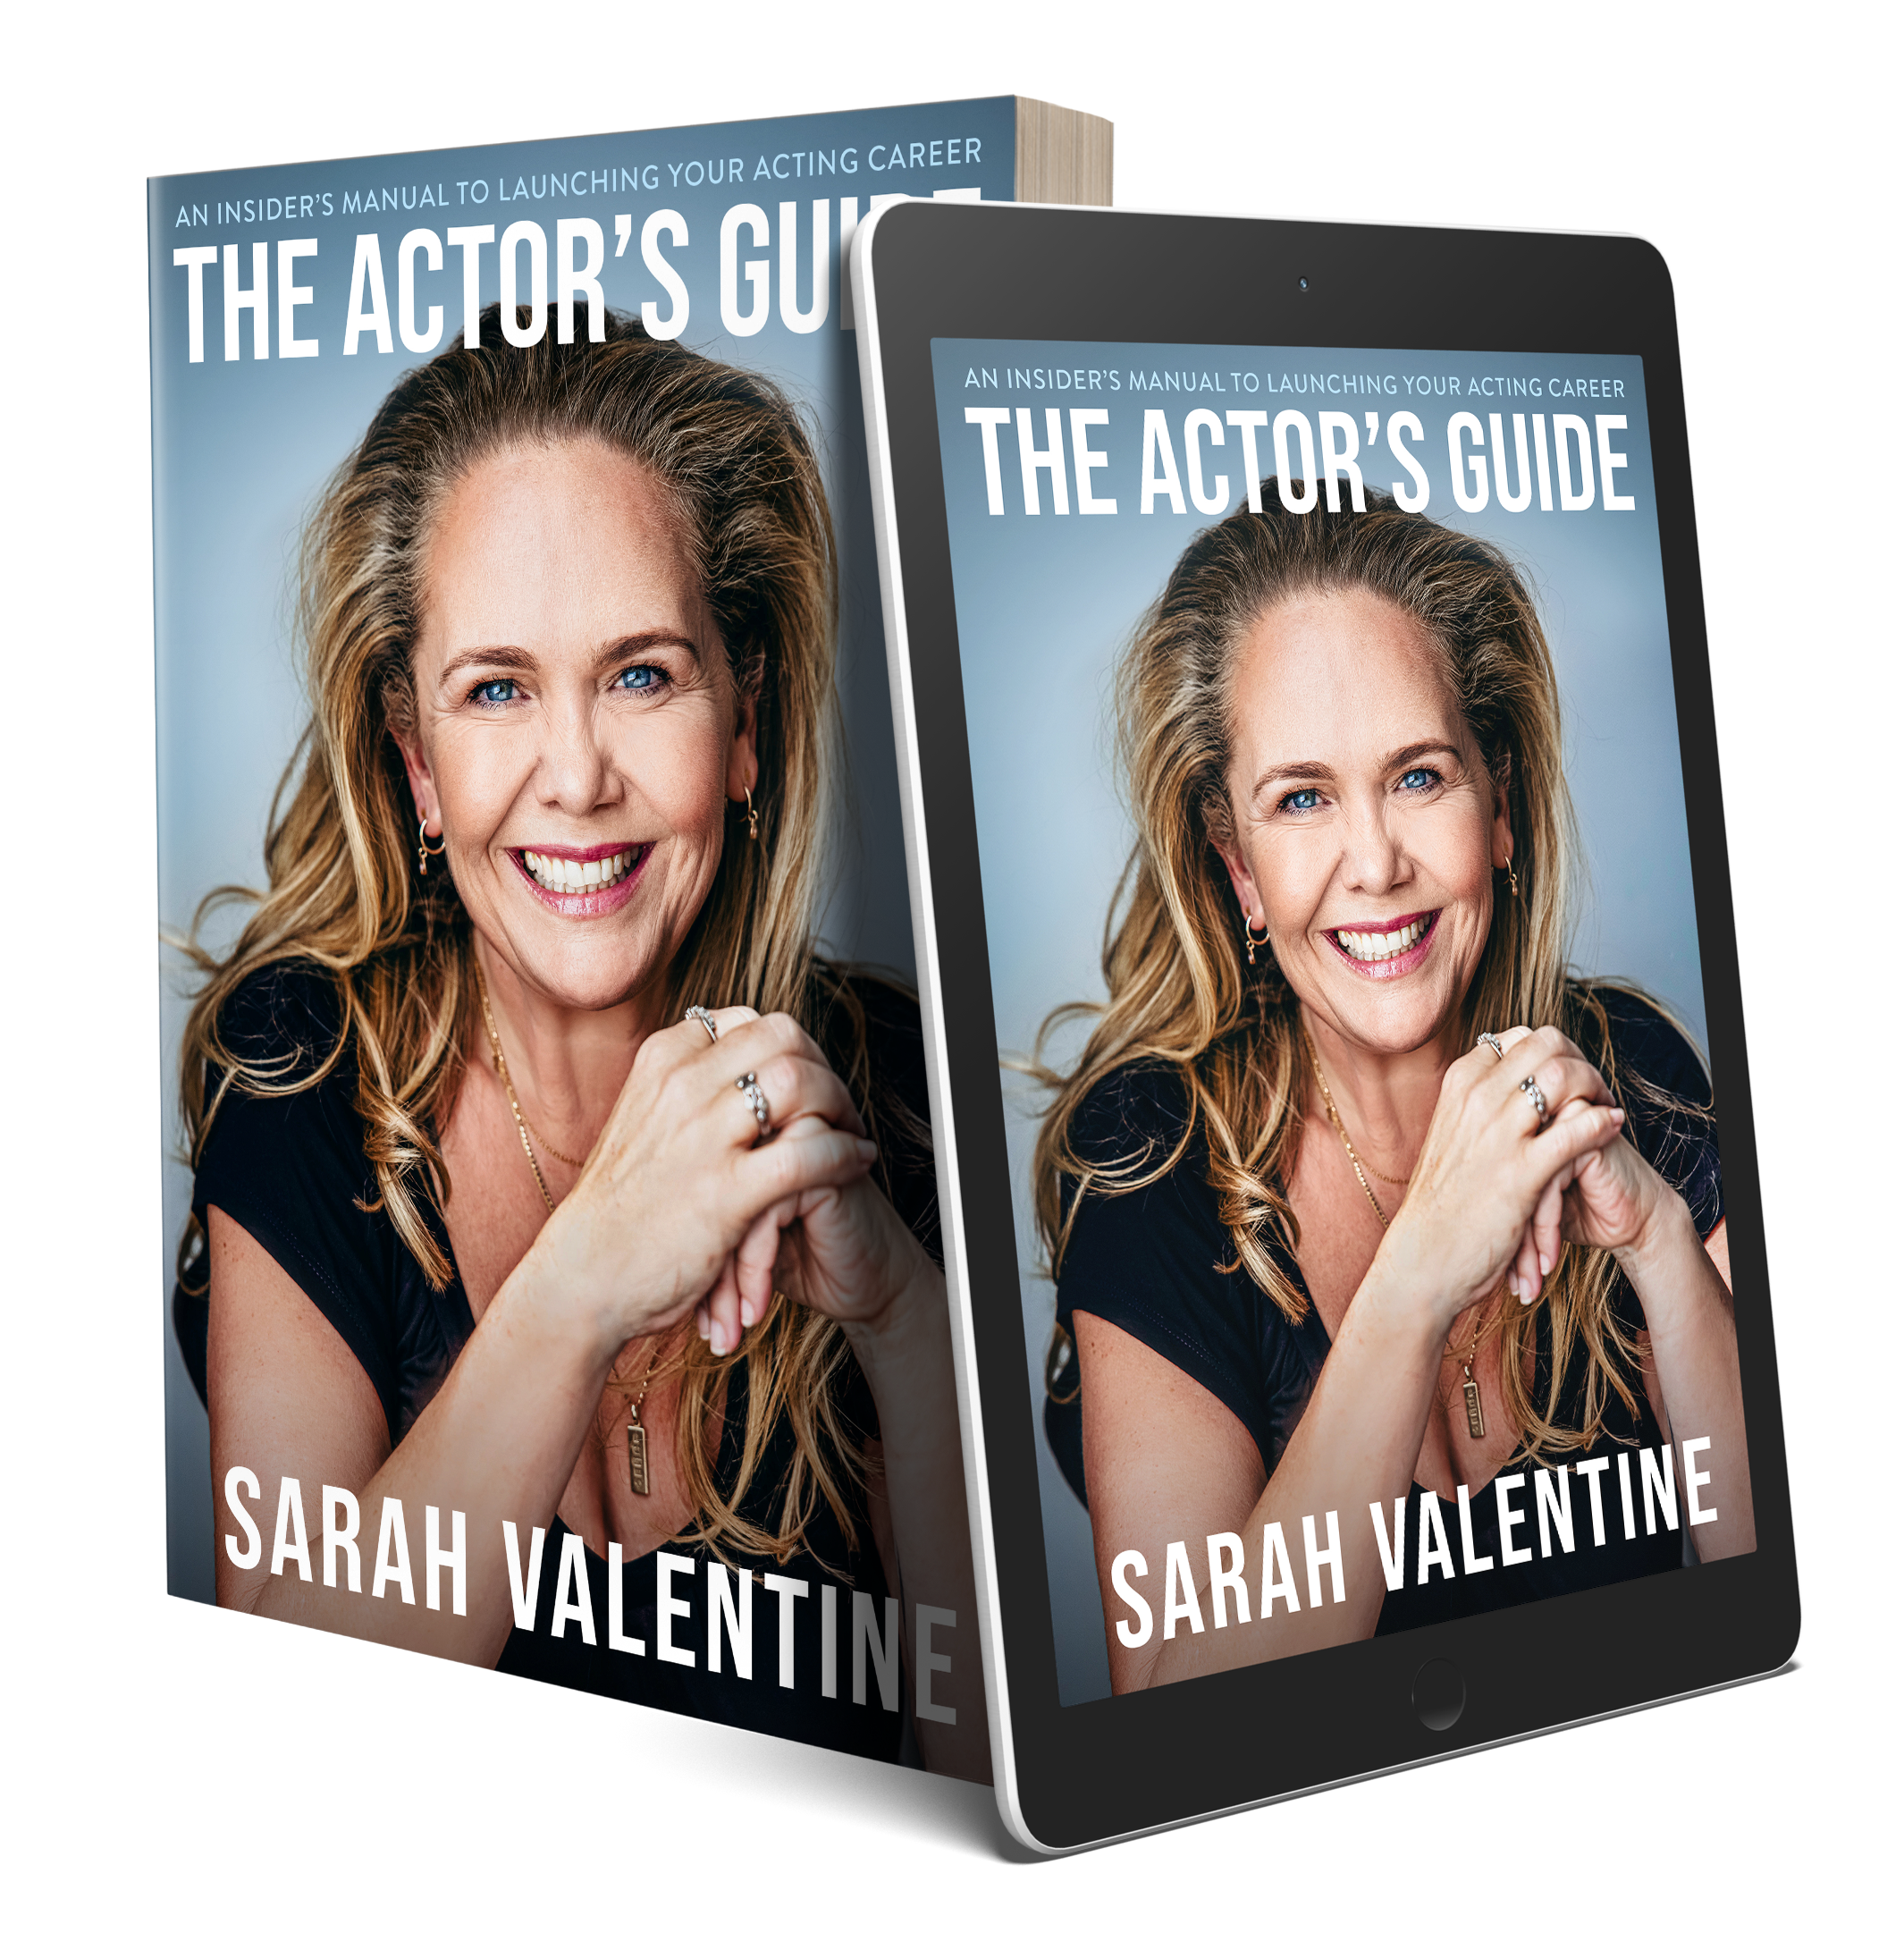 The Actors Guide - by Sarah Valentine